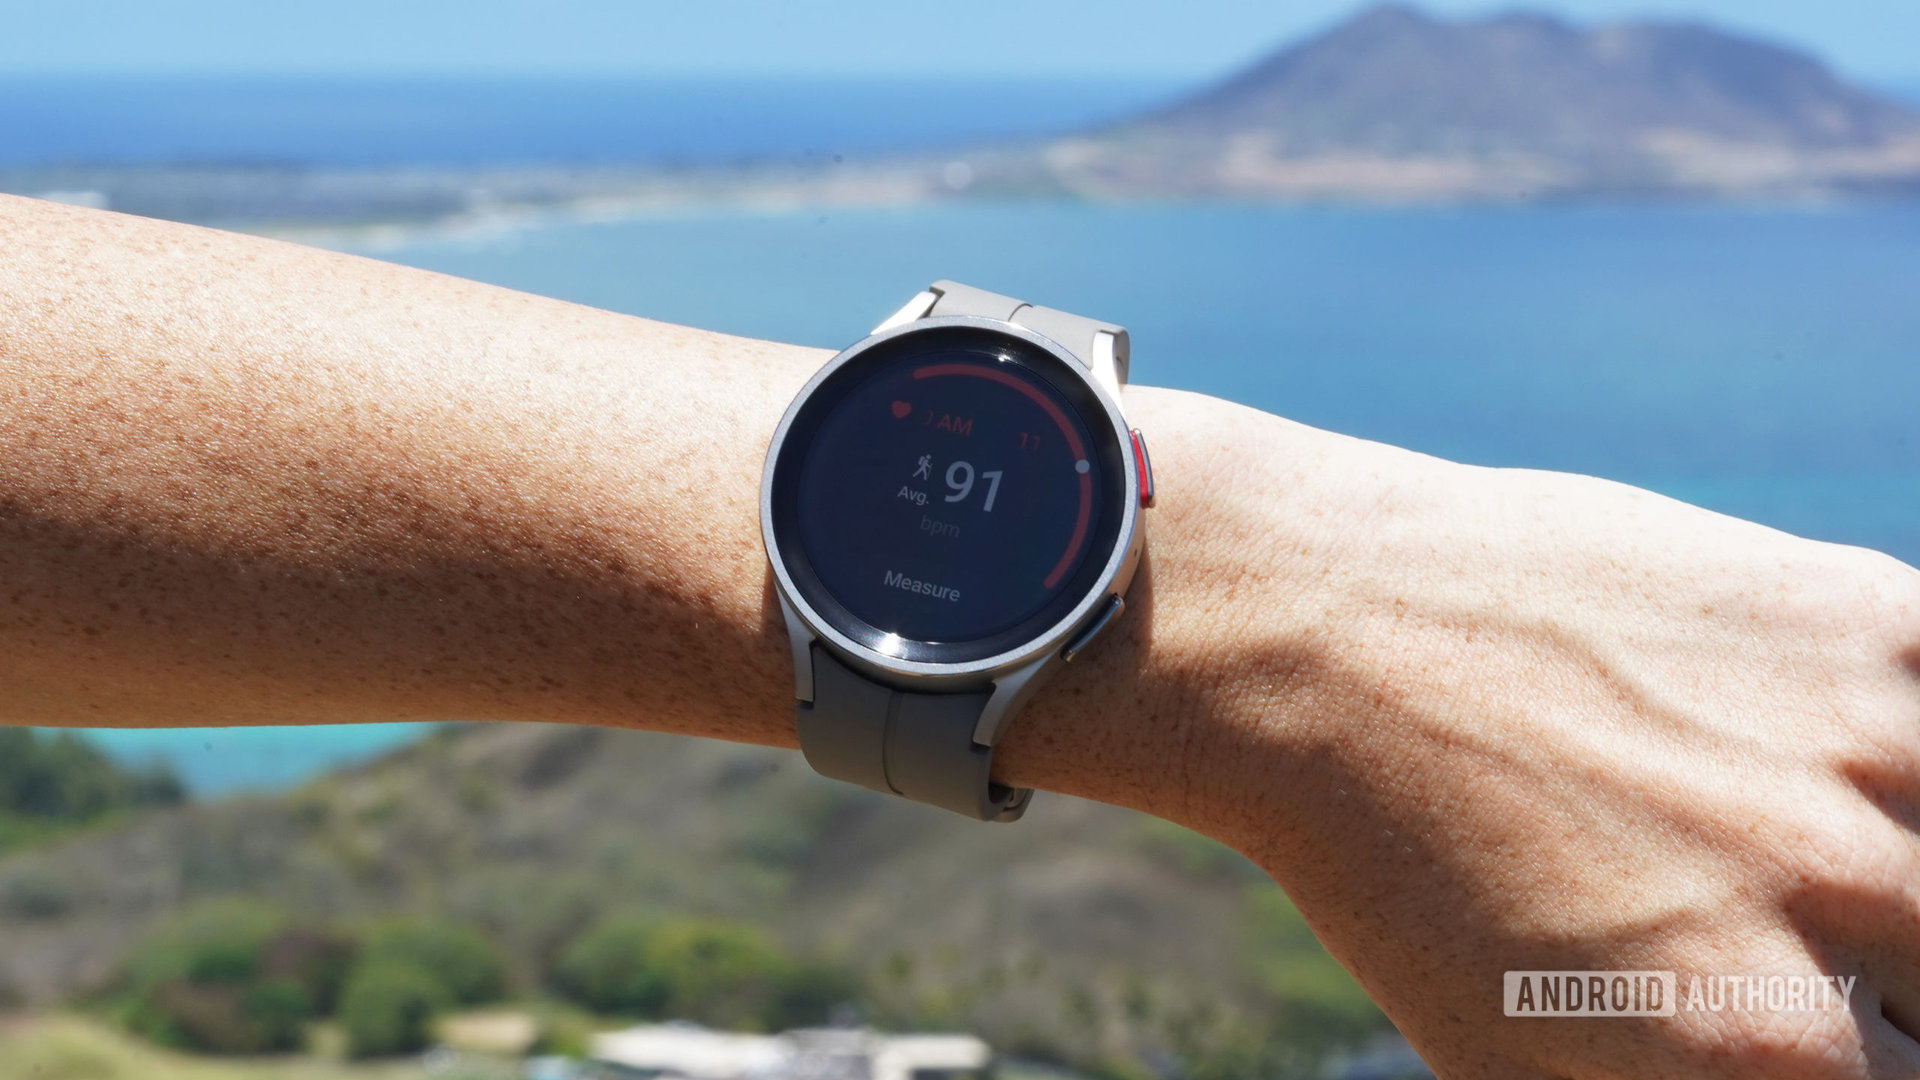 A Samsung Galaxy Watch 5 Pro displays a user's heart rate while hiking.